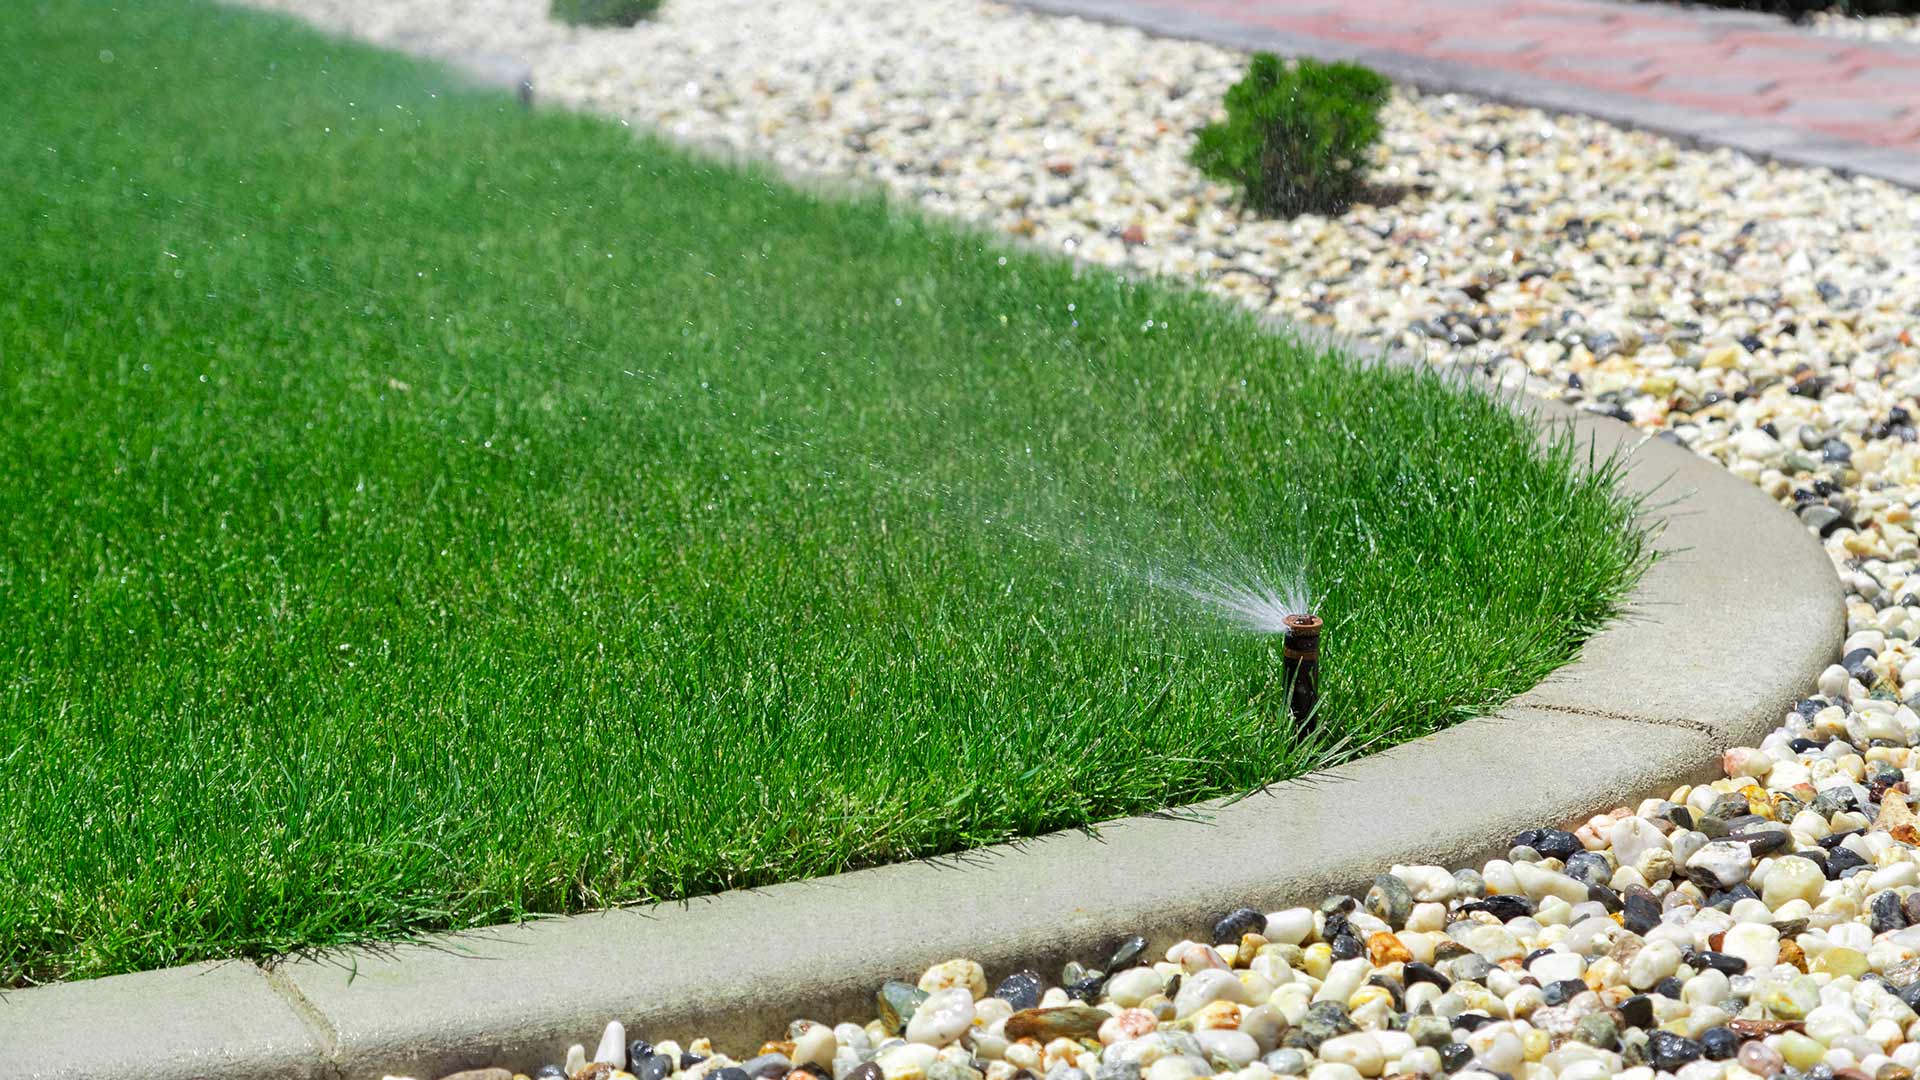 Deep green lawn grass and a water sprinkler running near Mankato, MN.